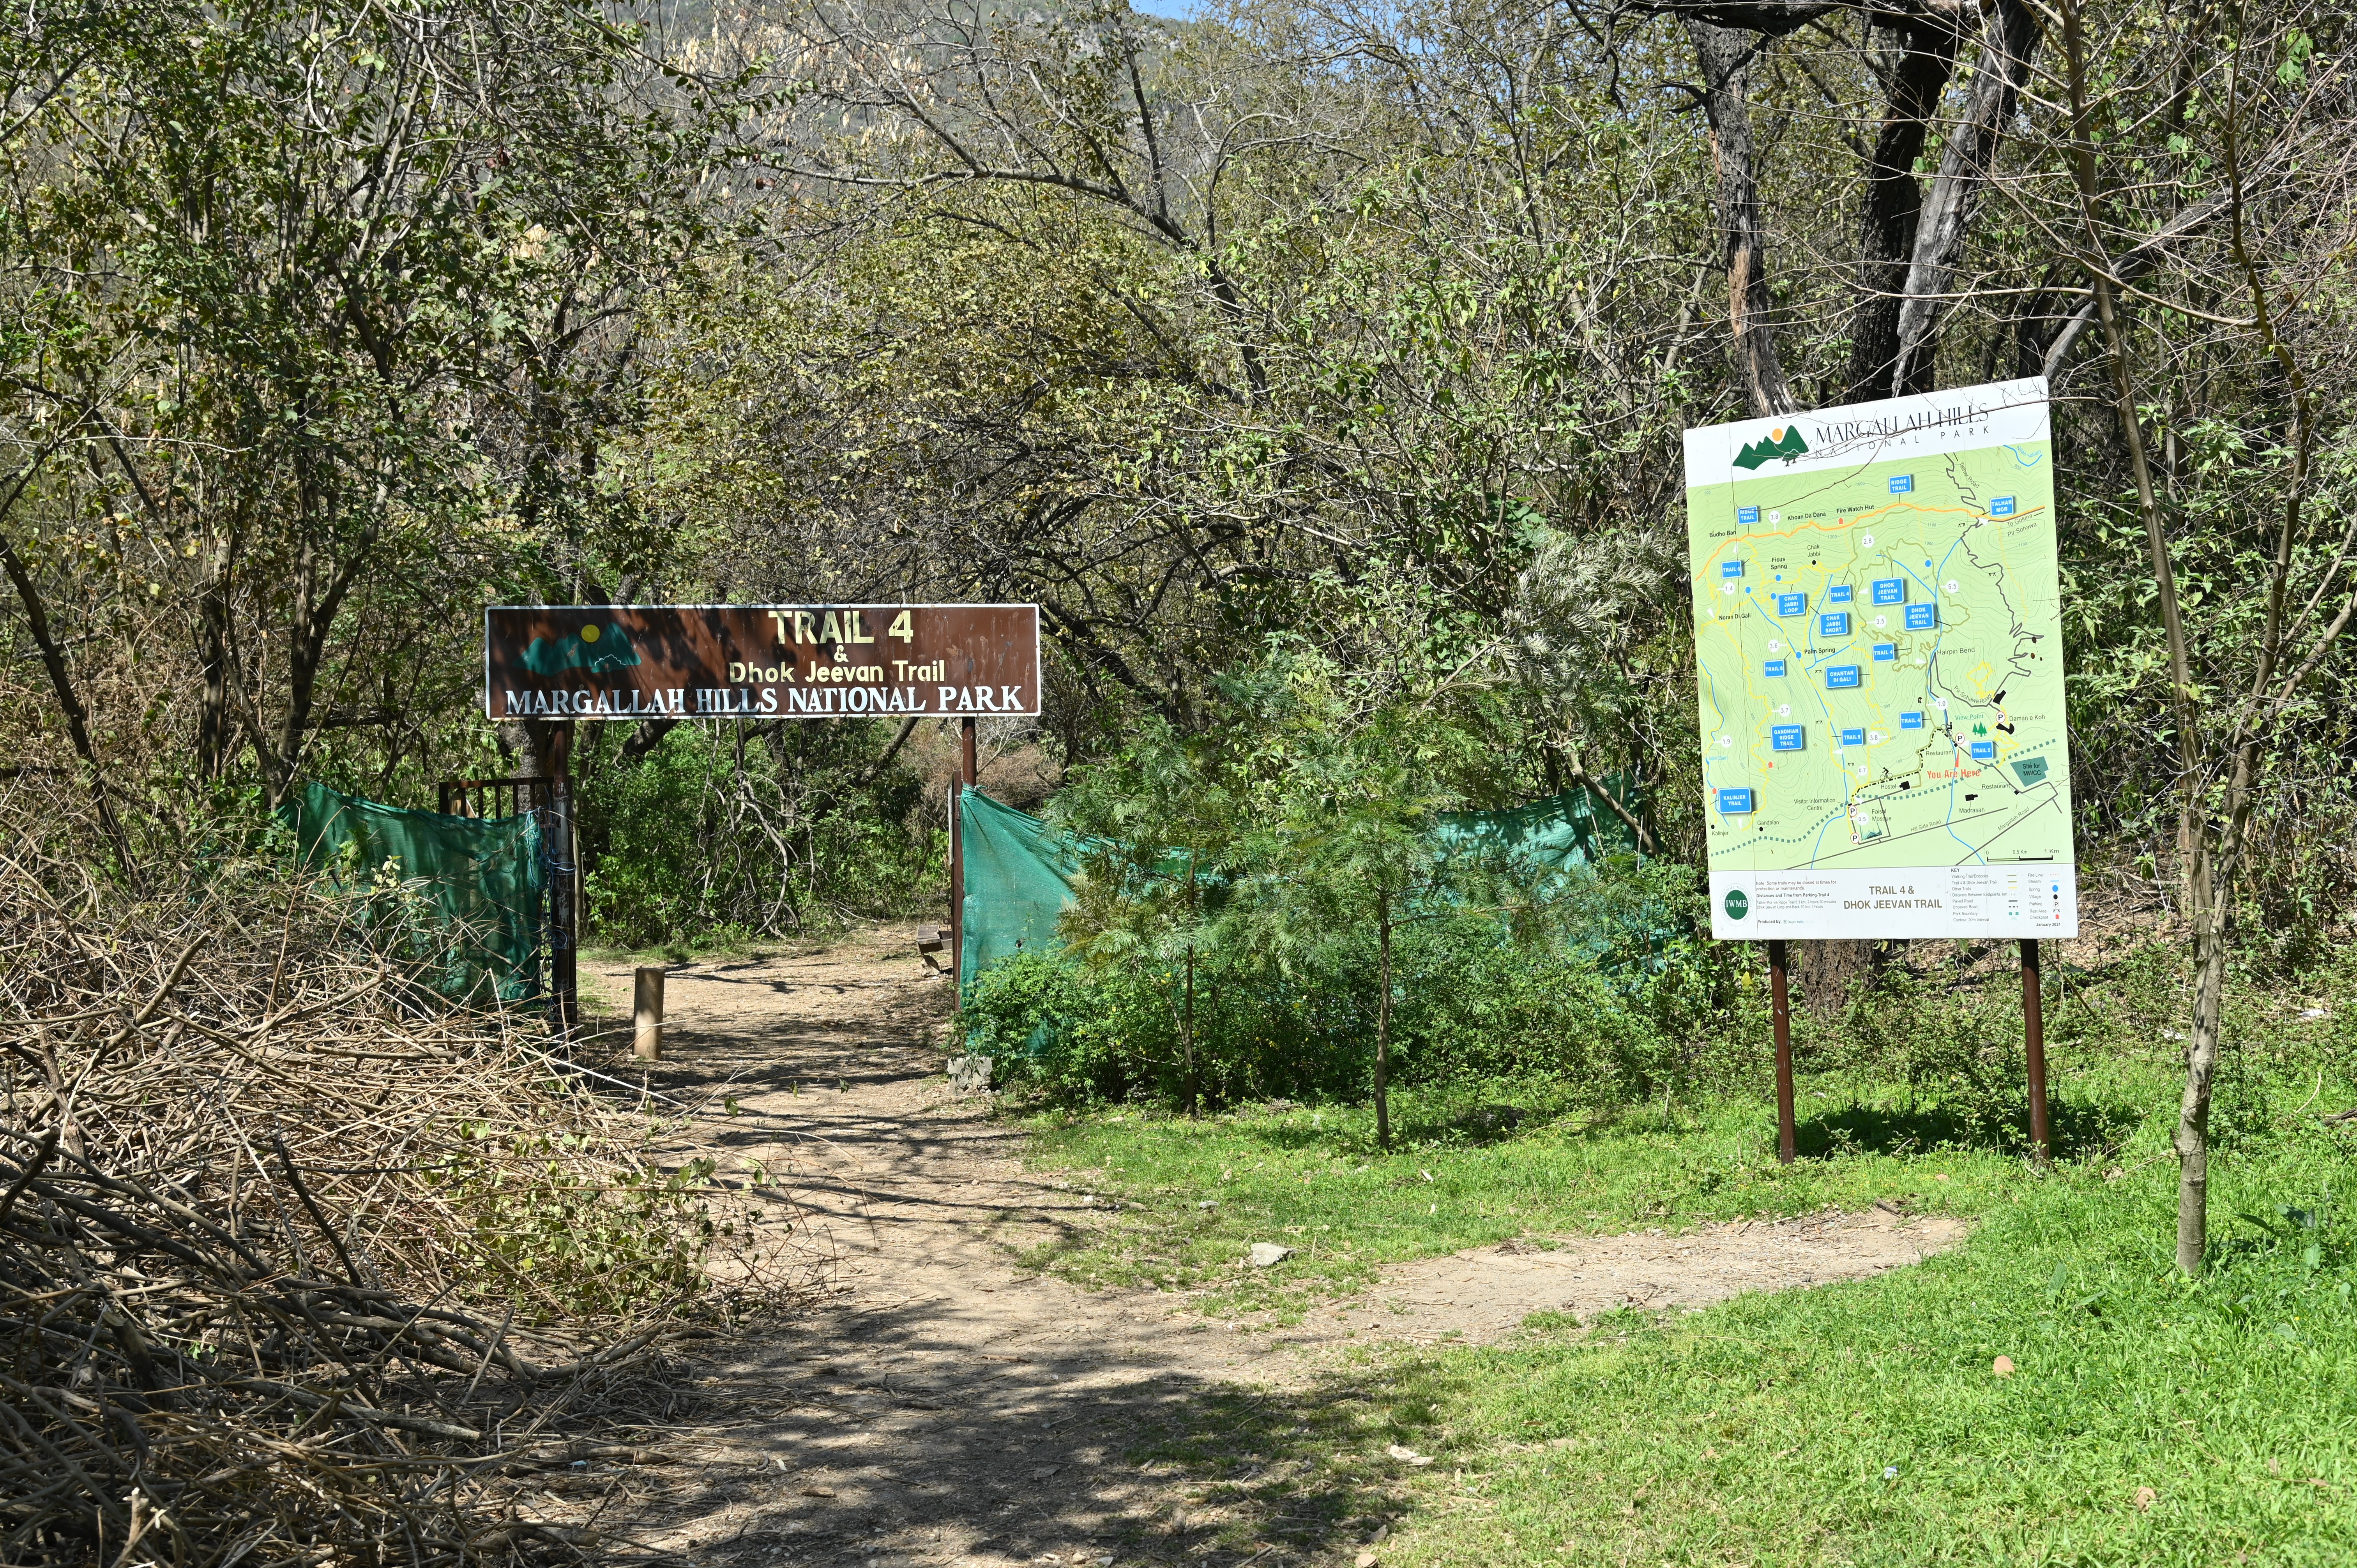 Trail 4 and Dhok Jeevan, a loop trail of above 10km passing entirely through dense forest